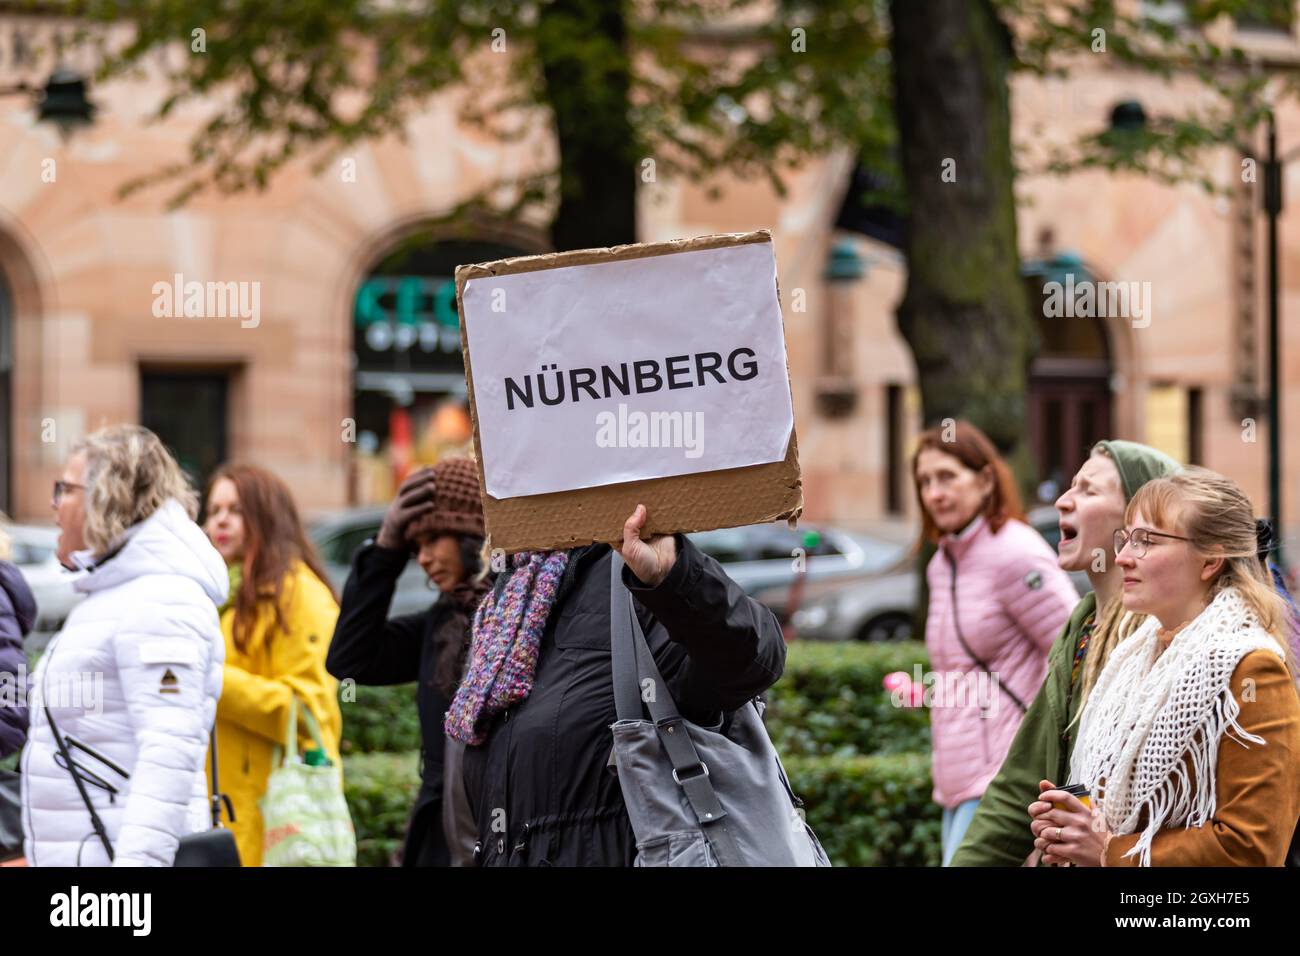 Anti-vaccine demonstrators marching with confusing signs in Esplanade Park, Helsinki, Finland Stock Photo